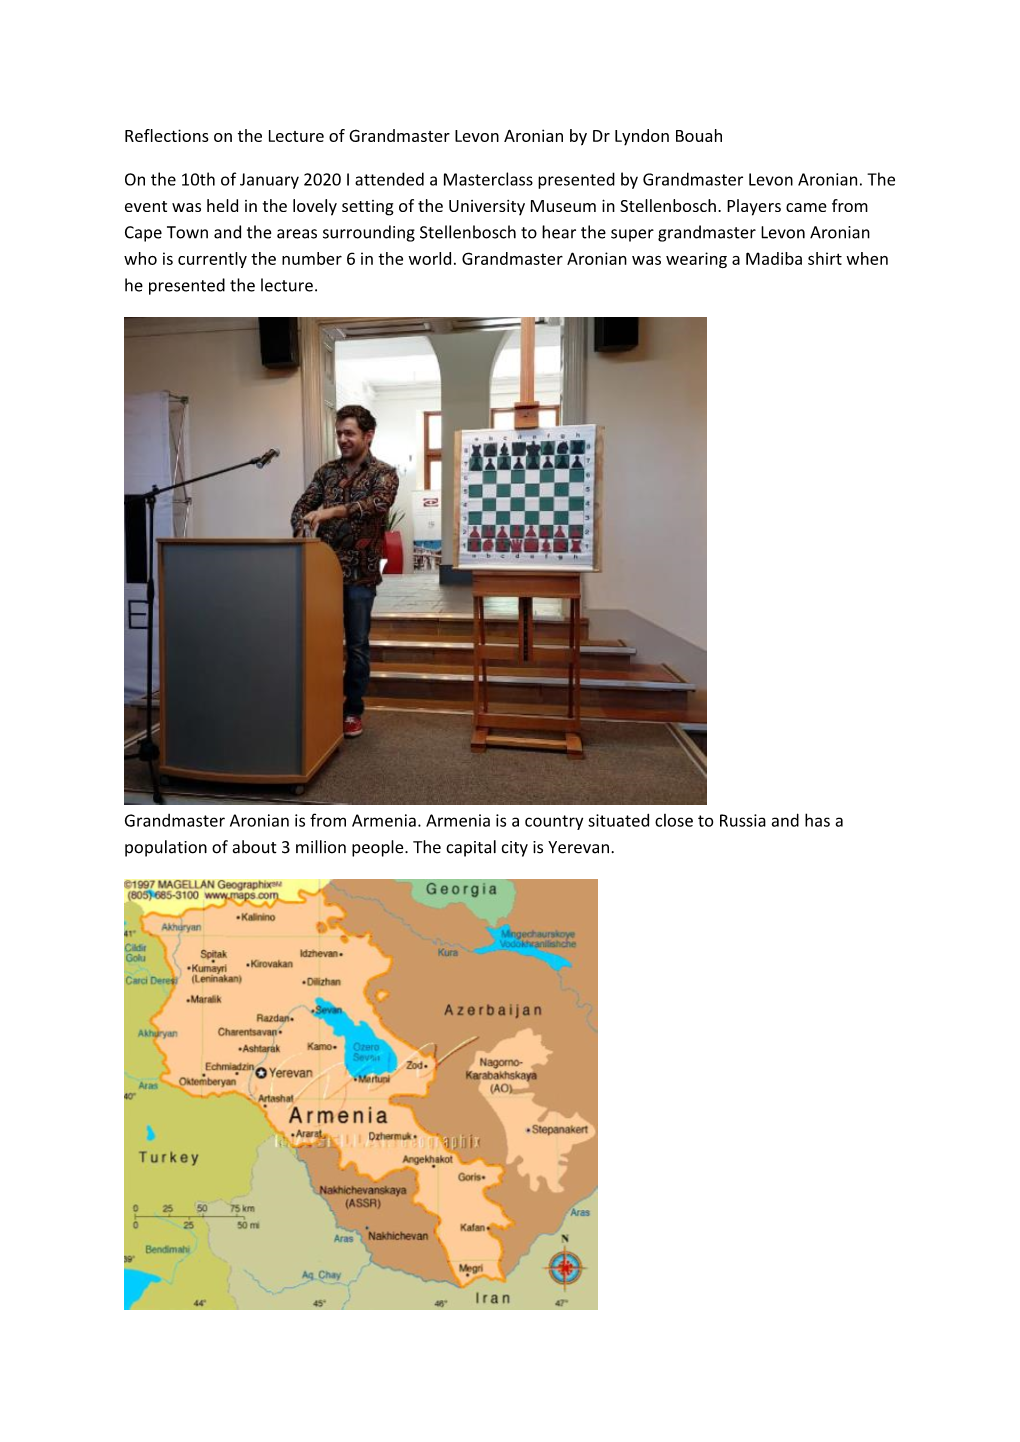 Reflections on the Lecture of Grandmaster Levon Aronian by Dr Lyndon Bouah